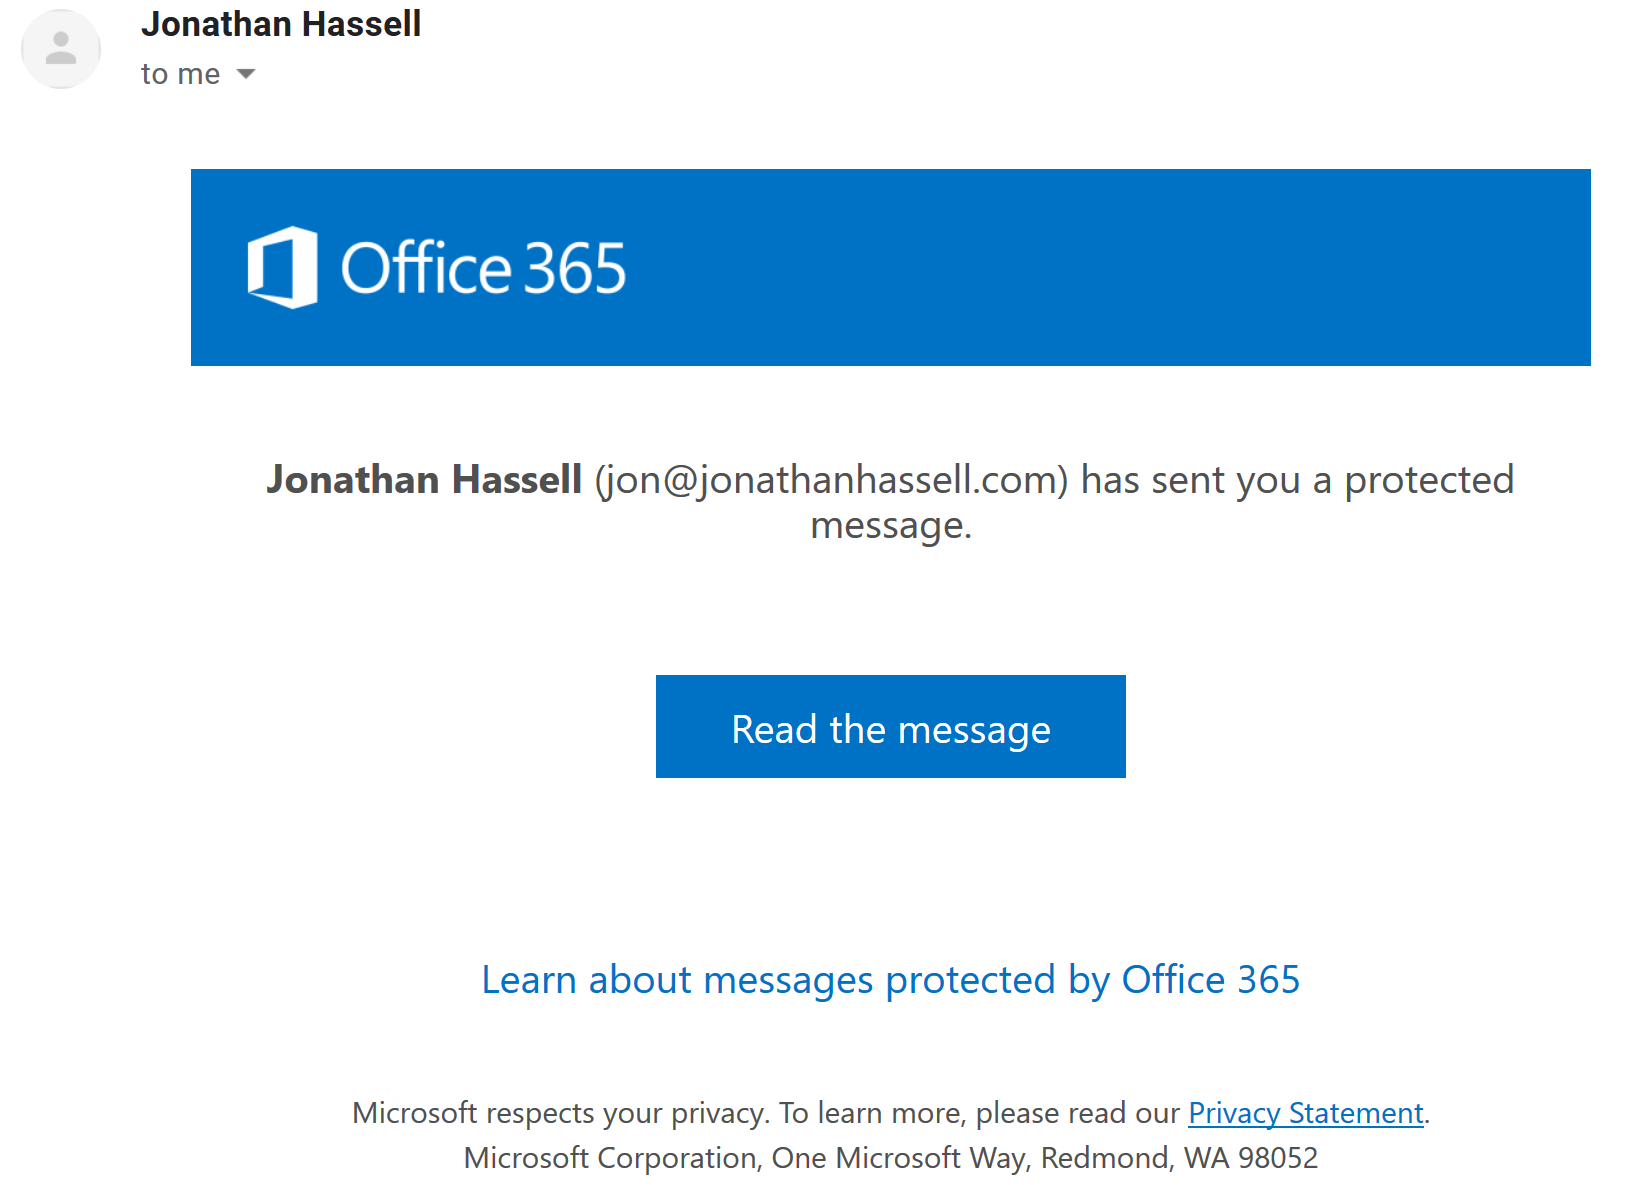 Receiving an encrypted message sent outside the Office 365 tenant